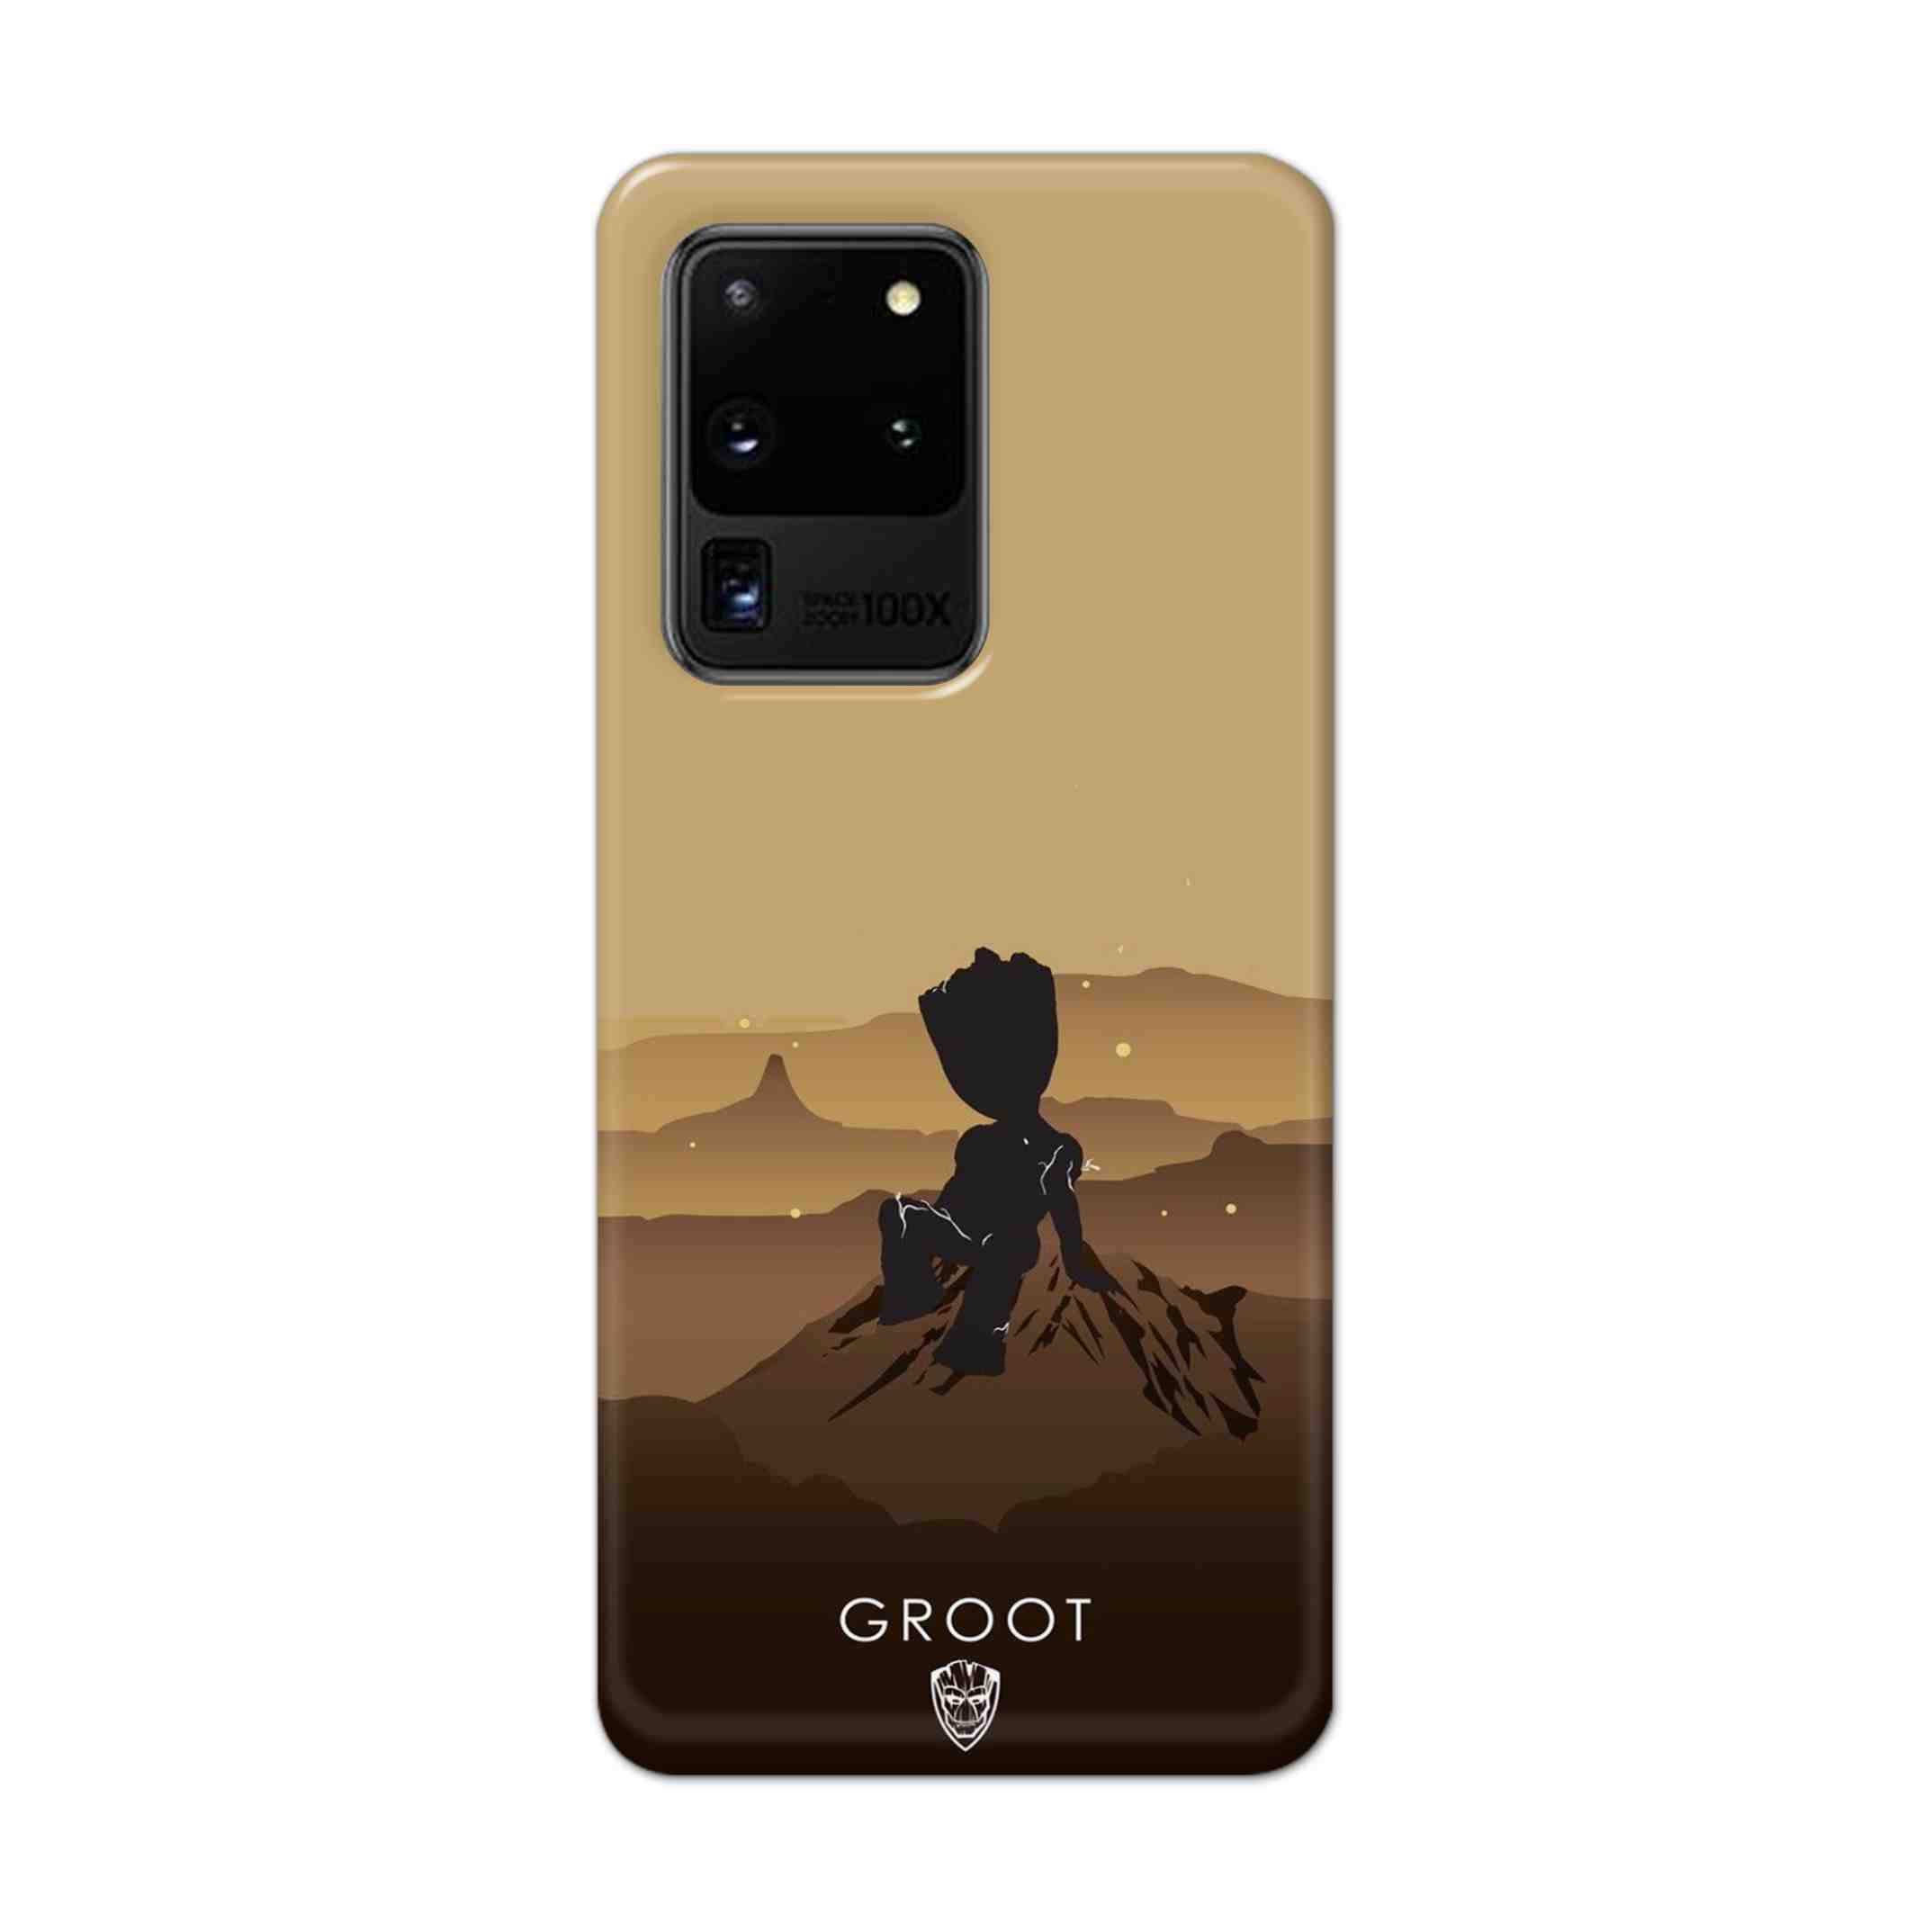 Buy I Am Groot Hard Back Mobile Phone Case Cover For Samsung Galaxy S20 Ultra Online